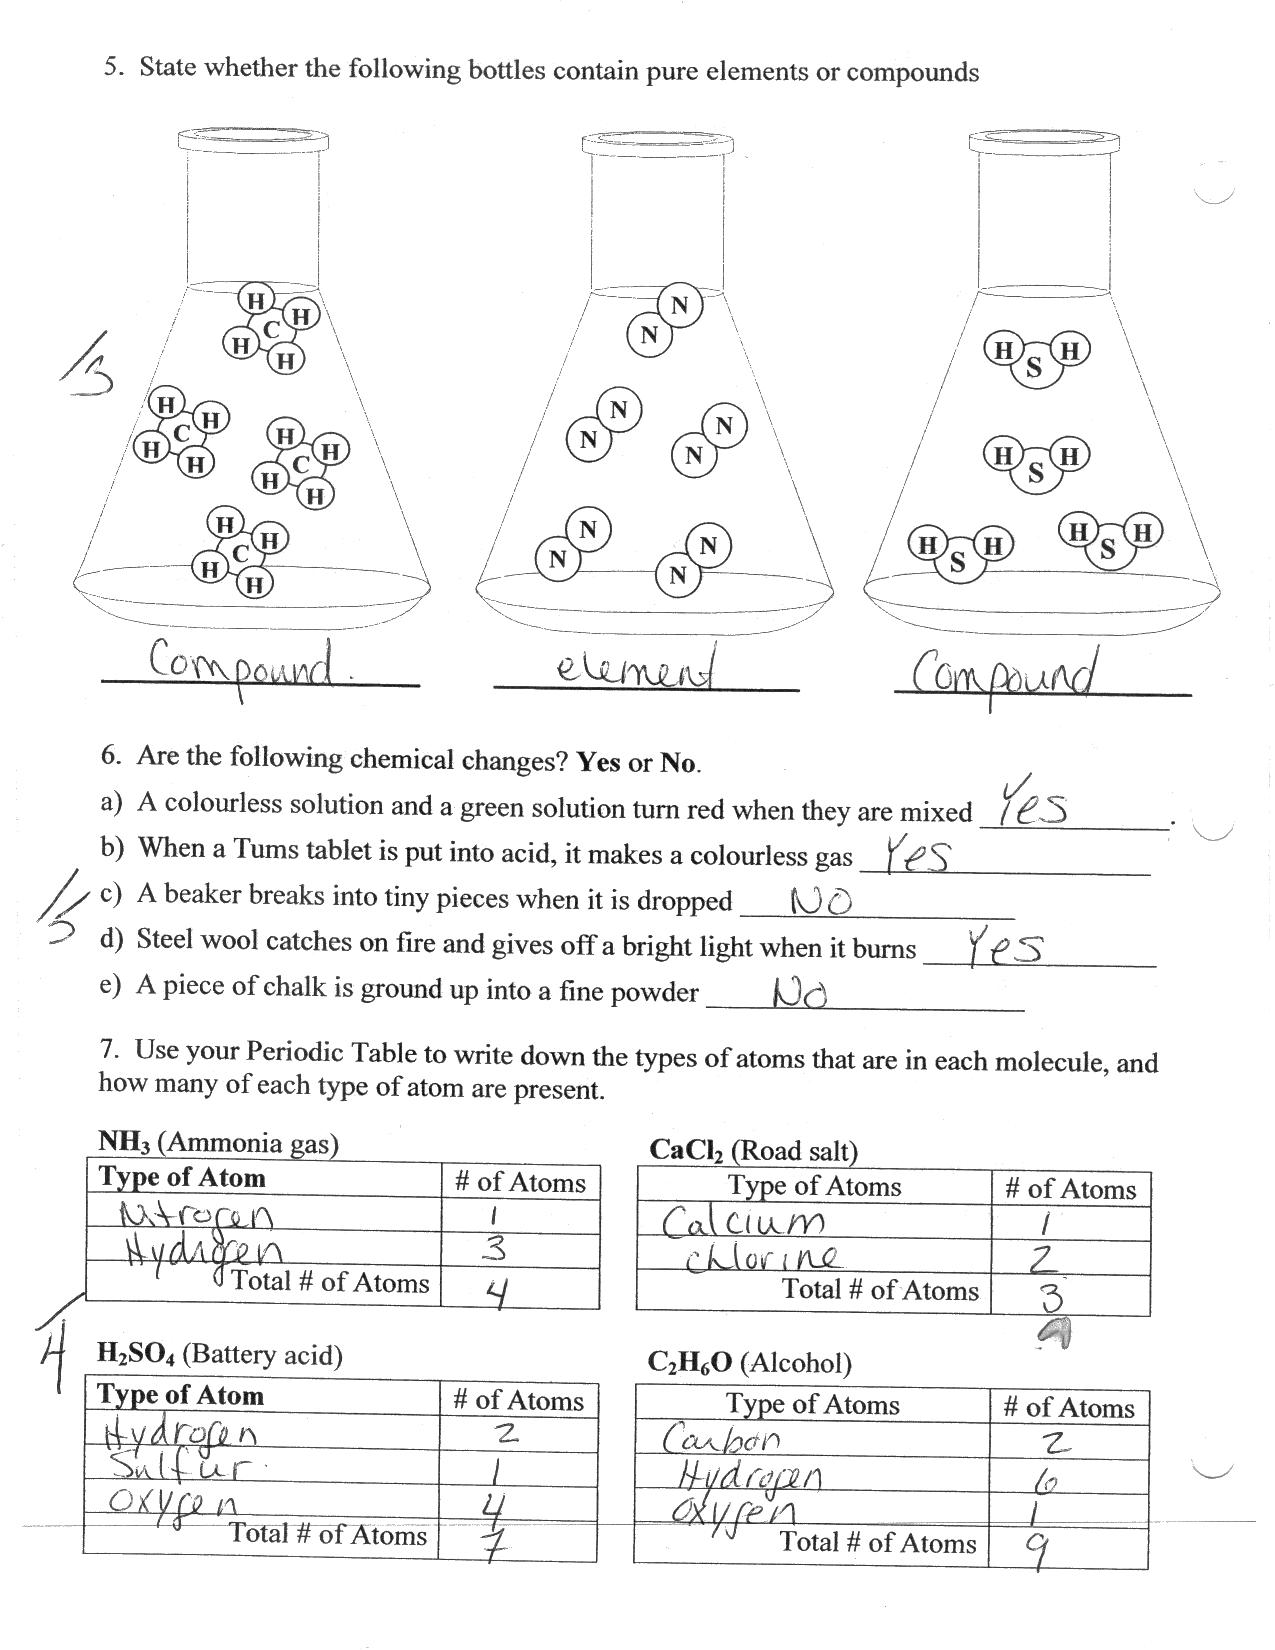 Counting Atoms Worksheet Answers